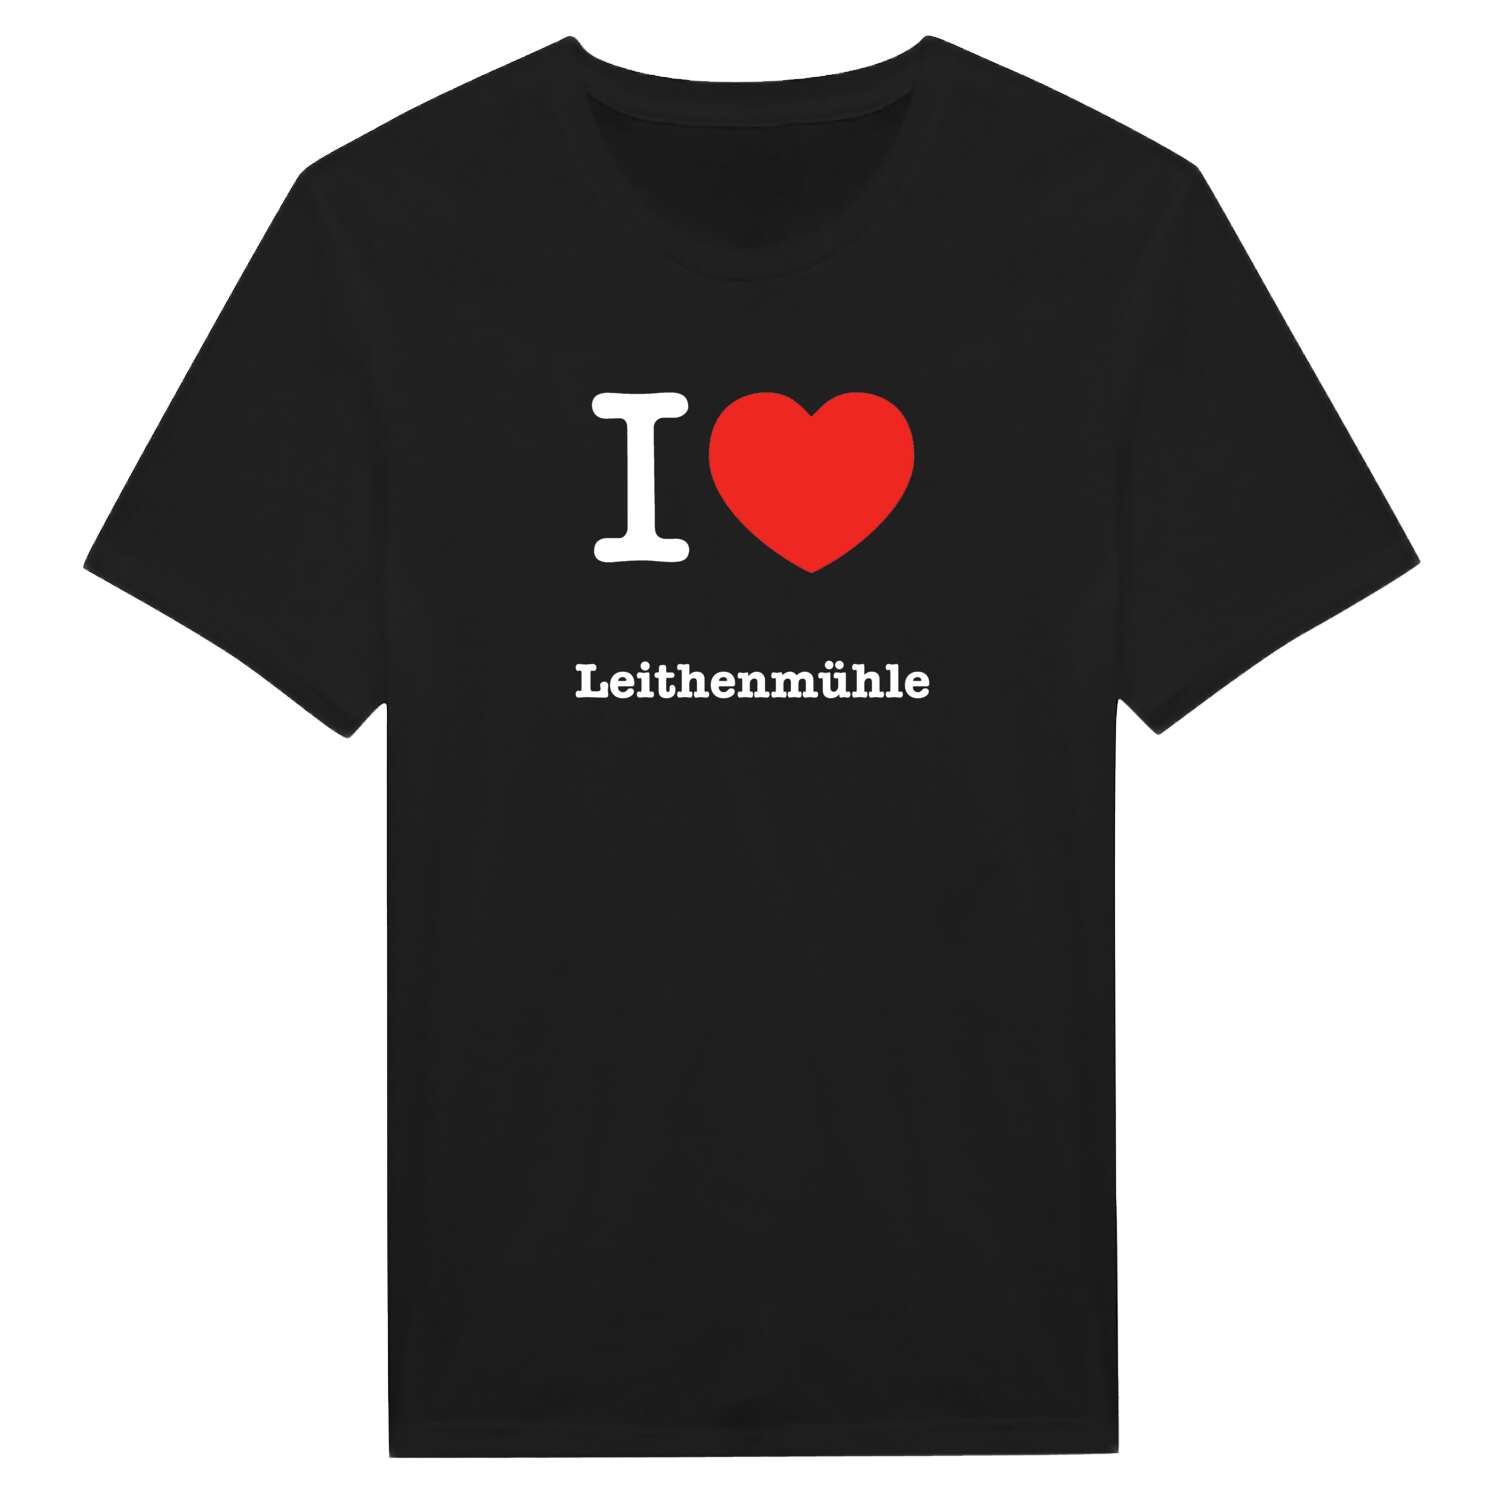 Leithenmühle T-Shirt »I love«